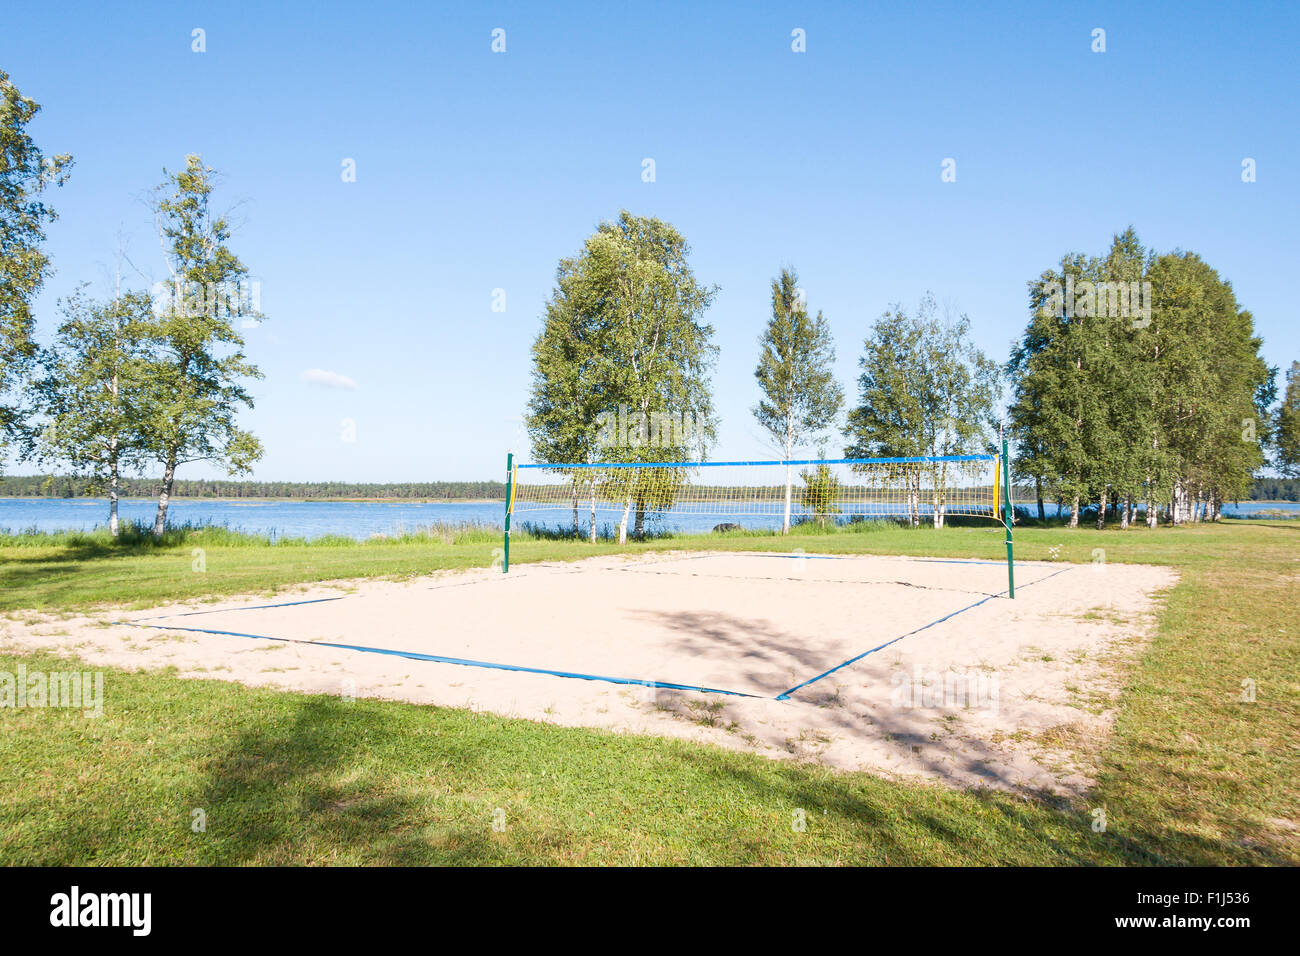 Sandy volleyball field at a lake coast surrounded by grass in a sunny summer day Stock Photo